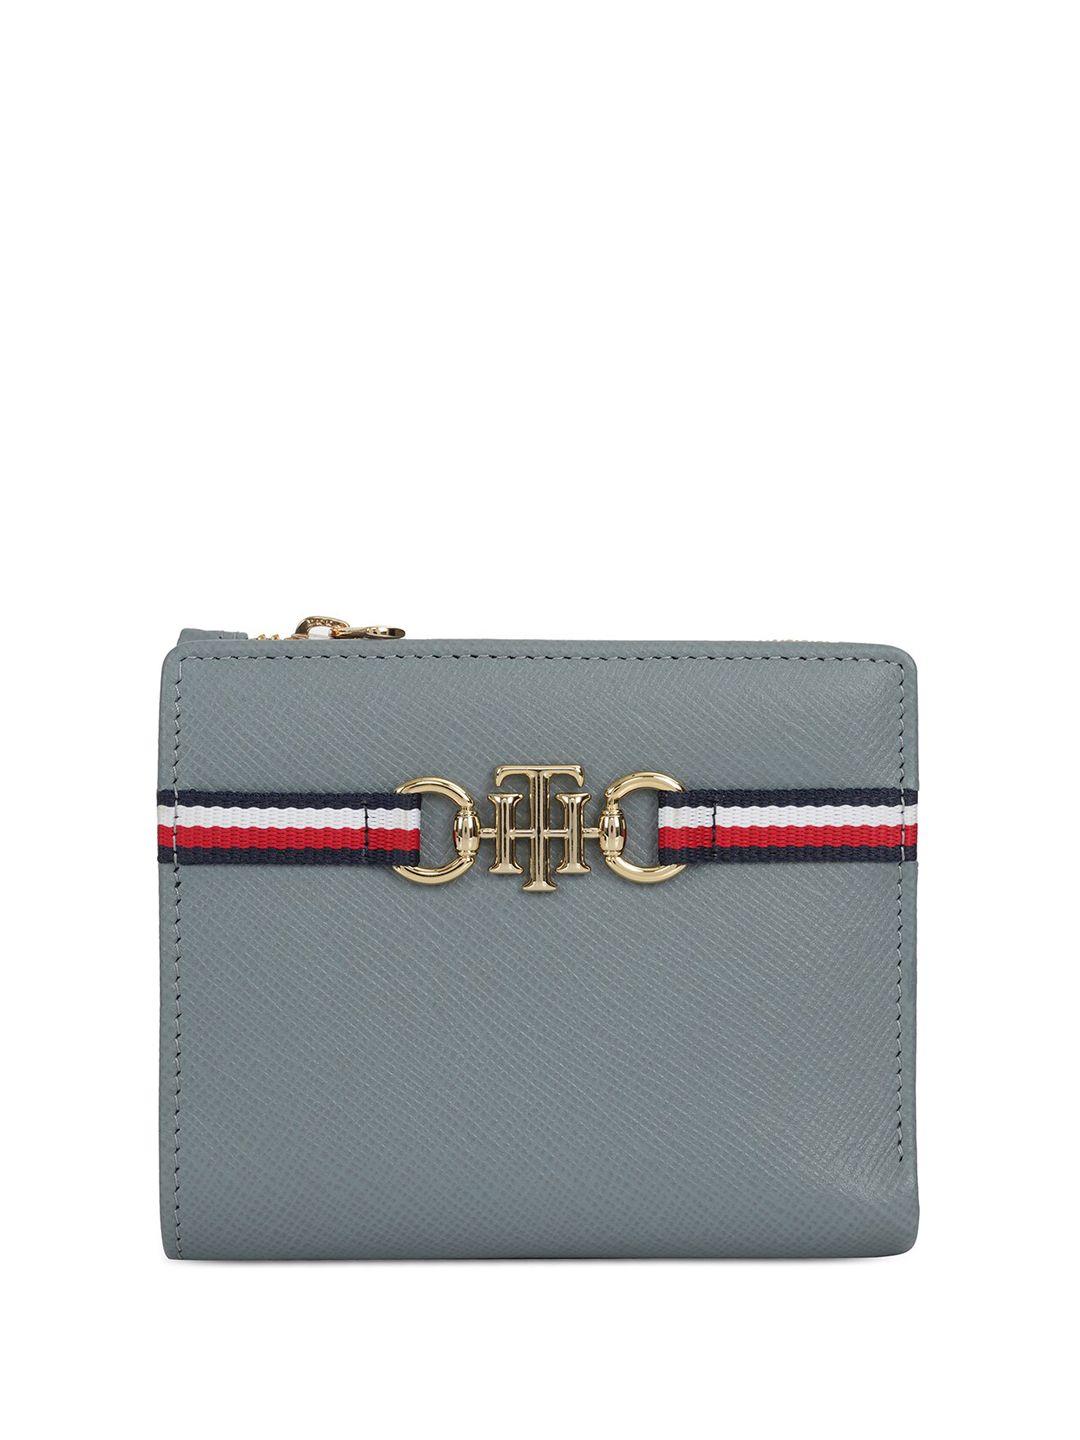 tommy hilfiger women textured leather two fold wallet